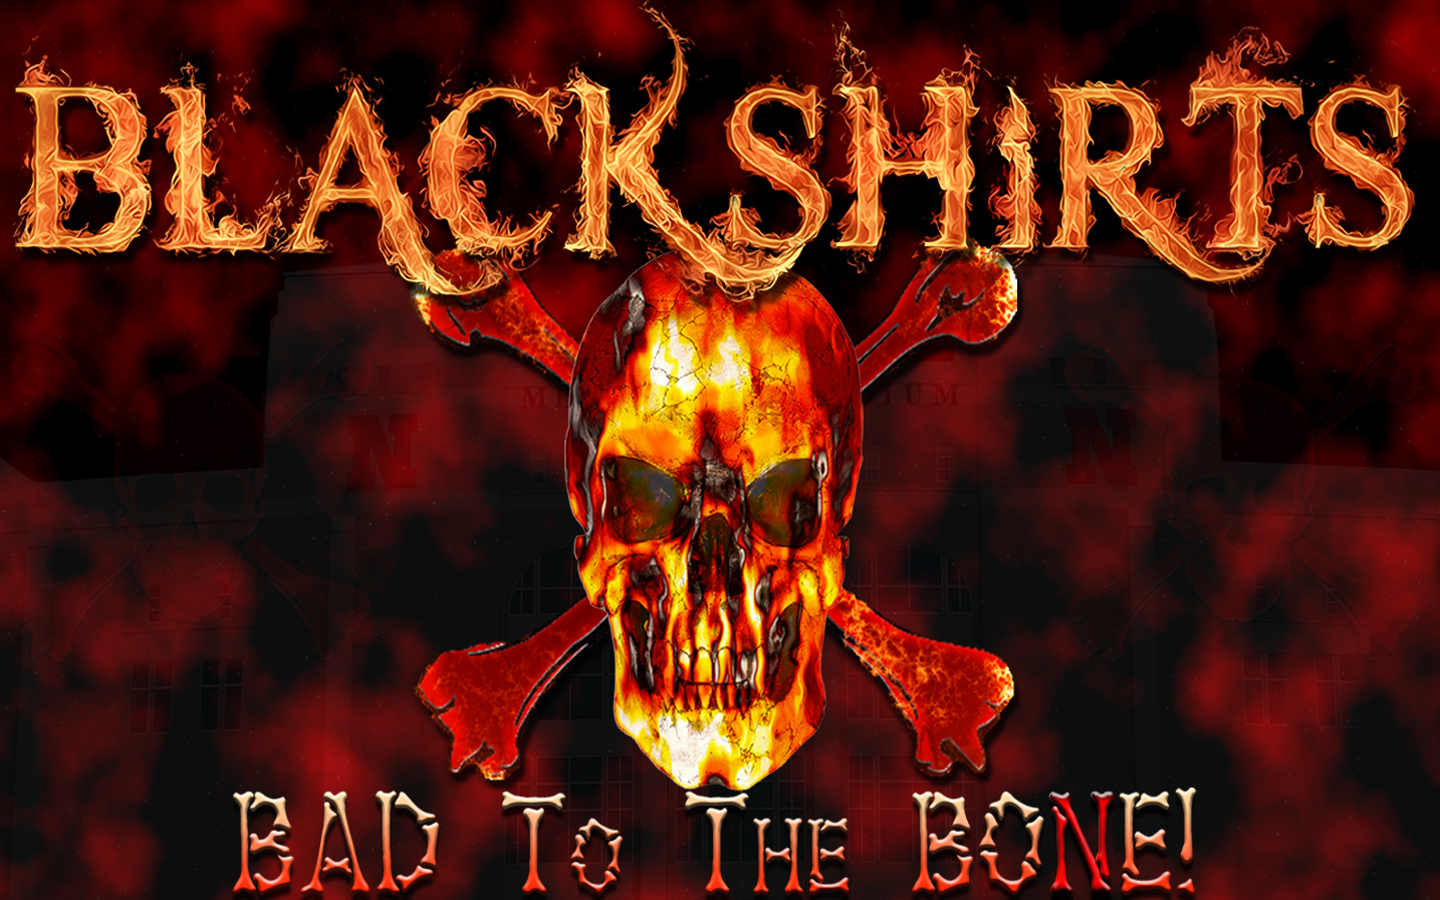 Wallpaper By Wicked Shadows Husker Blackshirts Bad To The Bone